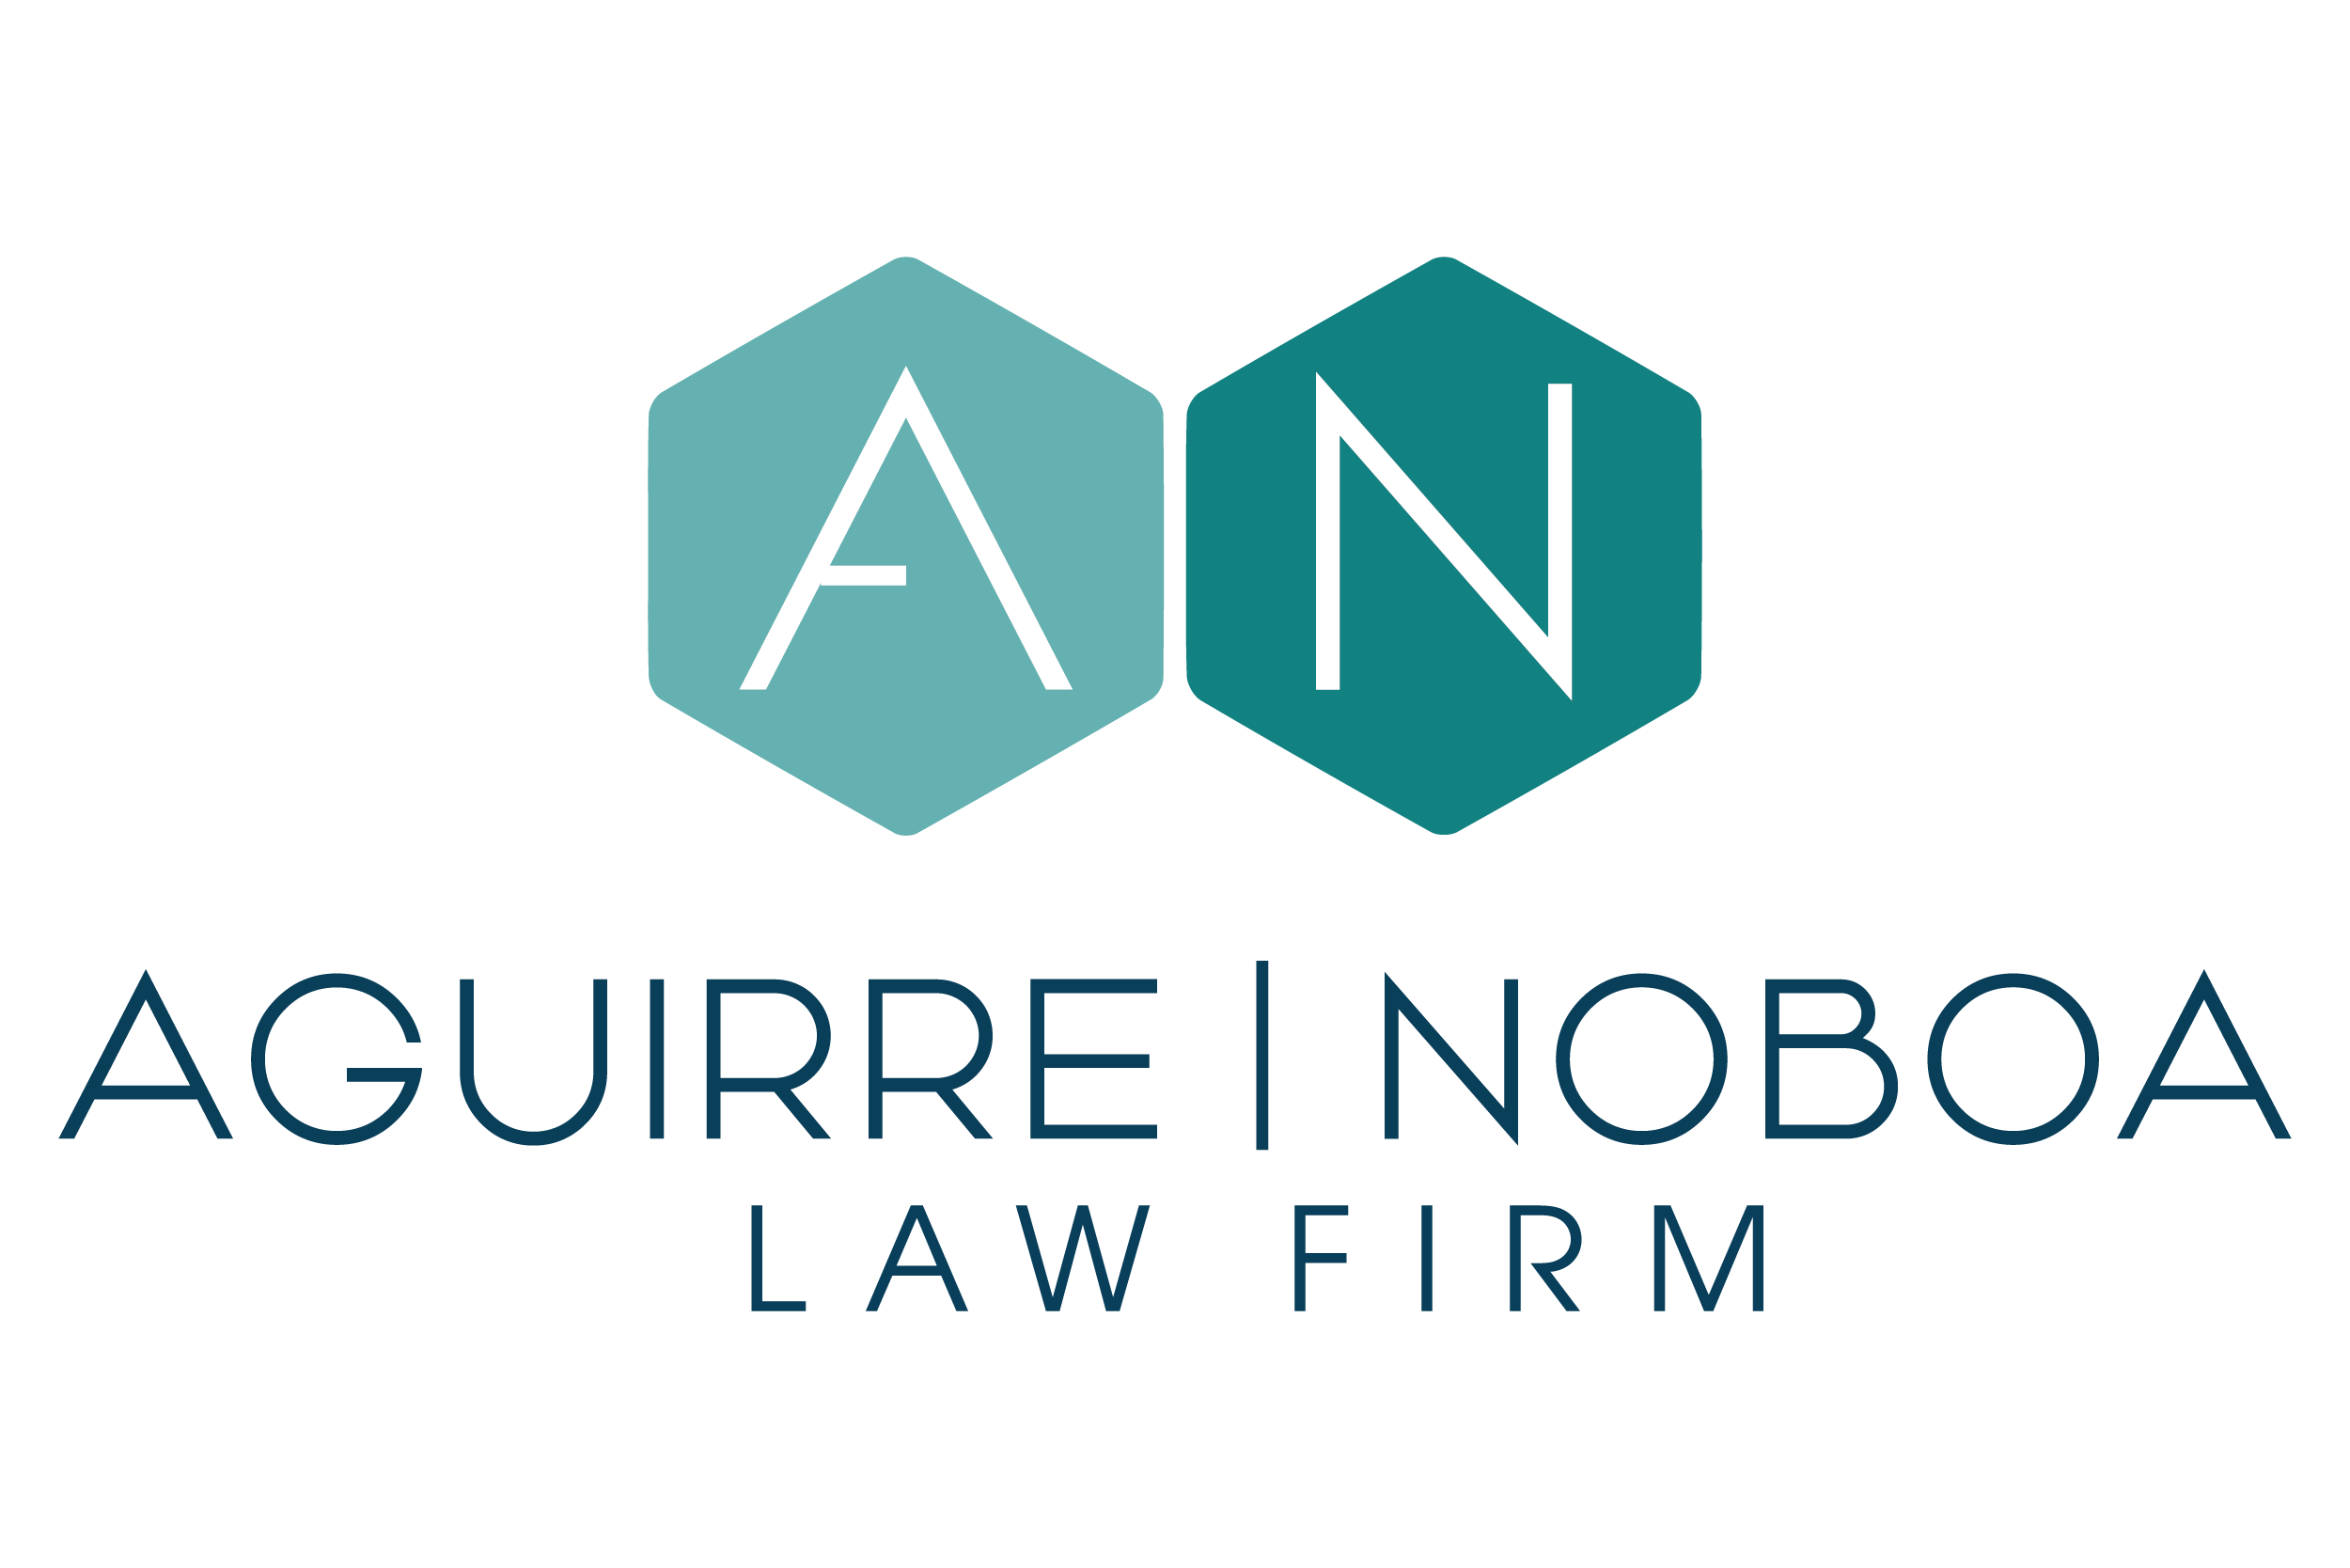 Aguirre | Noboa Law Firm